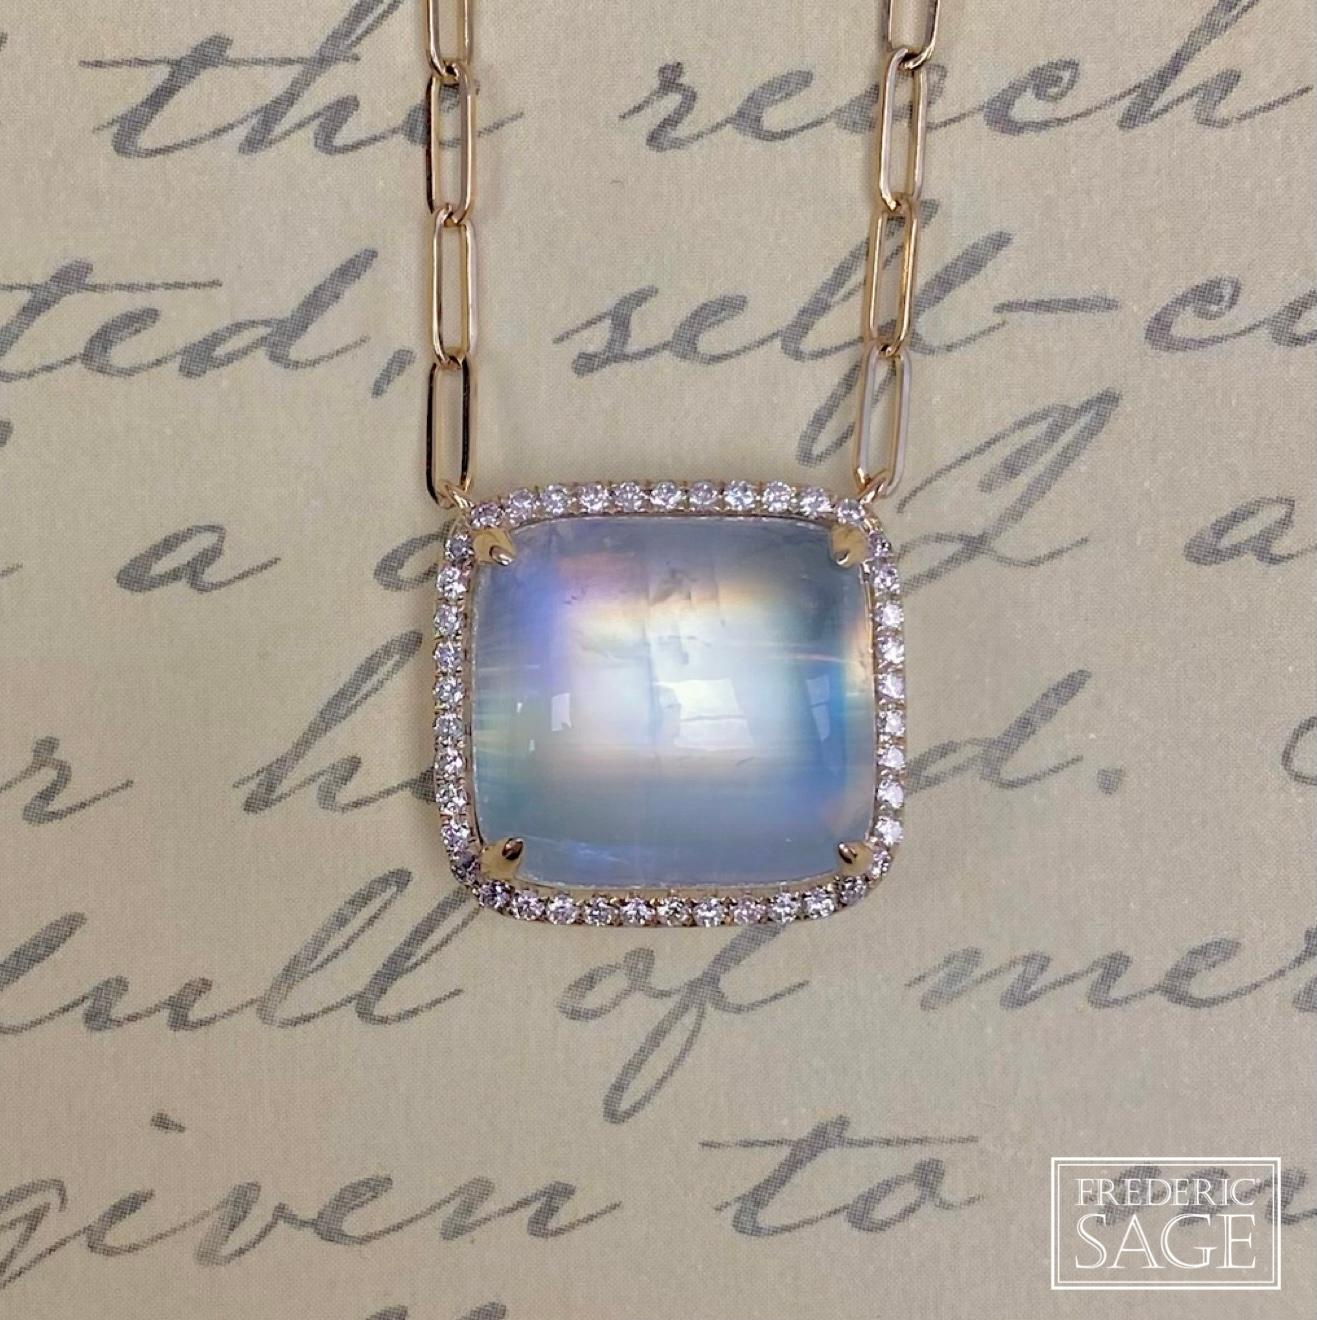 Cushion Moonstone On Diamond Halo One Of A Kind Pendant With Attached Chain, Moonstone 19.75 Ct, Diamond 0.29 Ct, (approximately 18 mm x 18 mm)

Available in other metal/ gemstone options: These Gemstone pieces can be made in white, pink, yellow